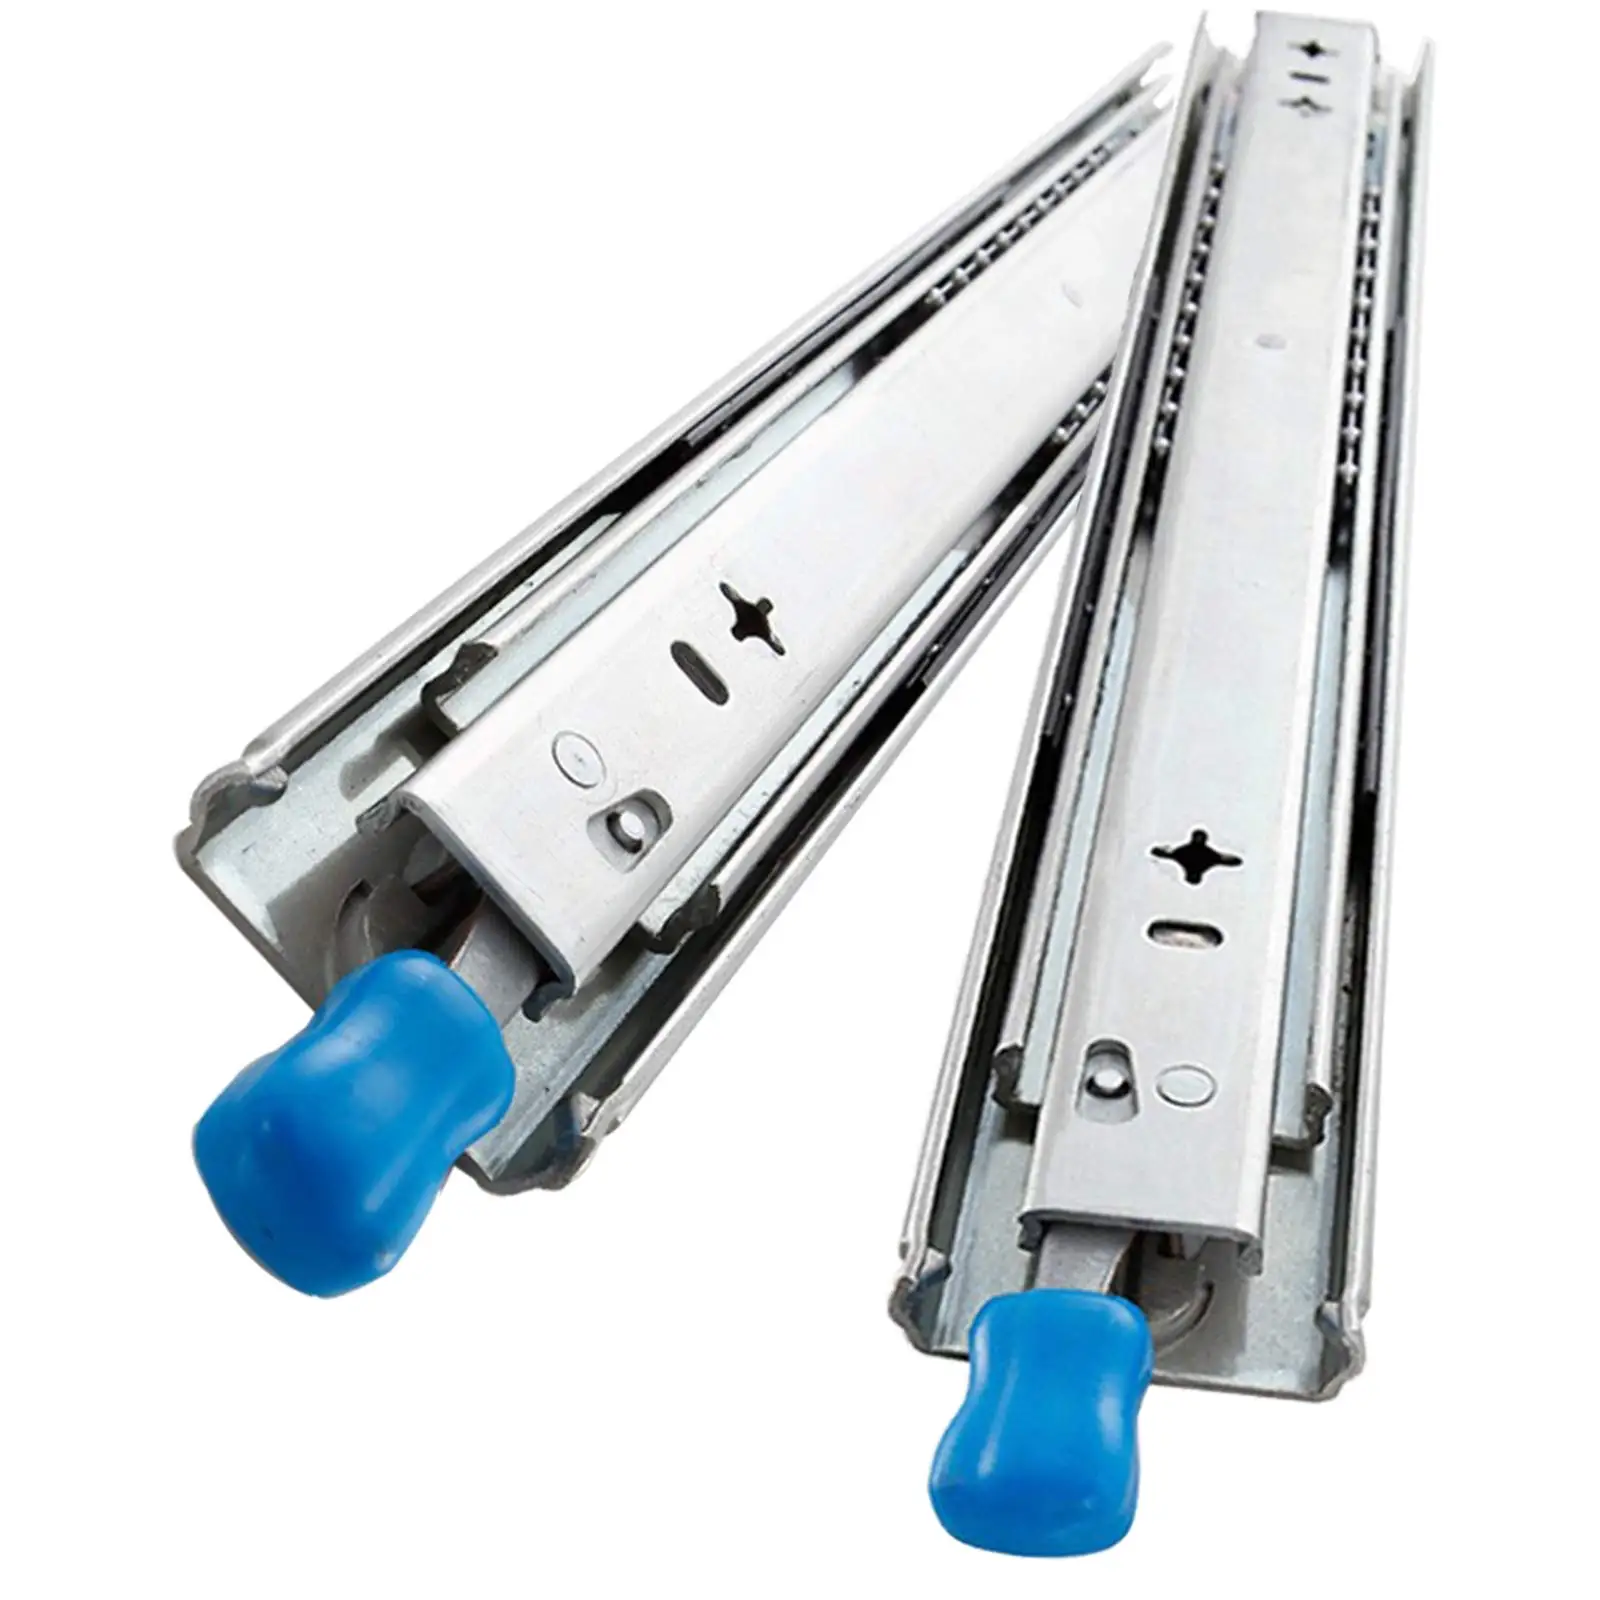 

Heavy Duty Drawer Slides with Lock Full Extension Ball Bearing Locking Rails Glides Industrial Slide Runners (53MM Wide)